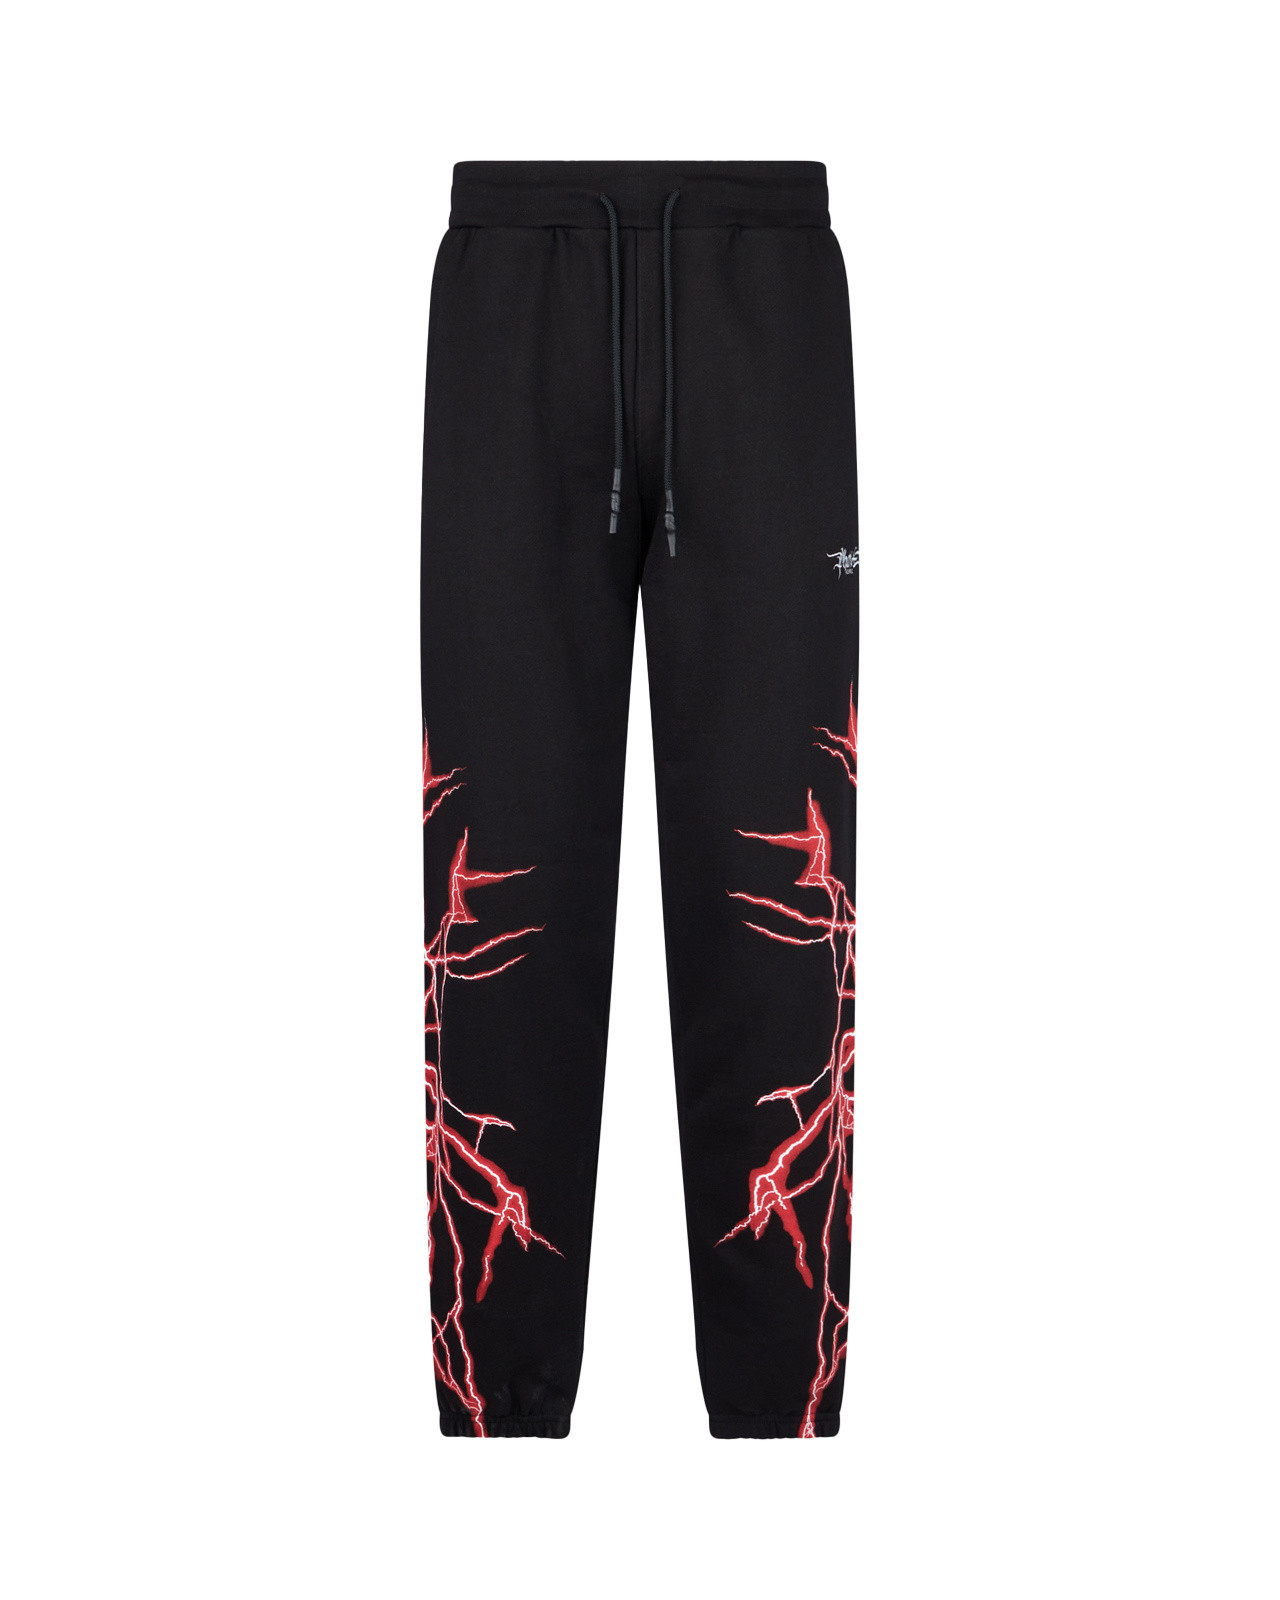 Phobia - Cotton trousers with lightning bolt print, Black, large image number 0